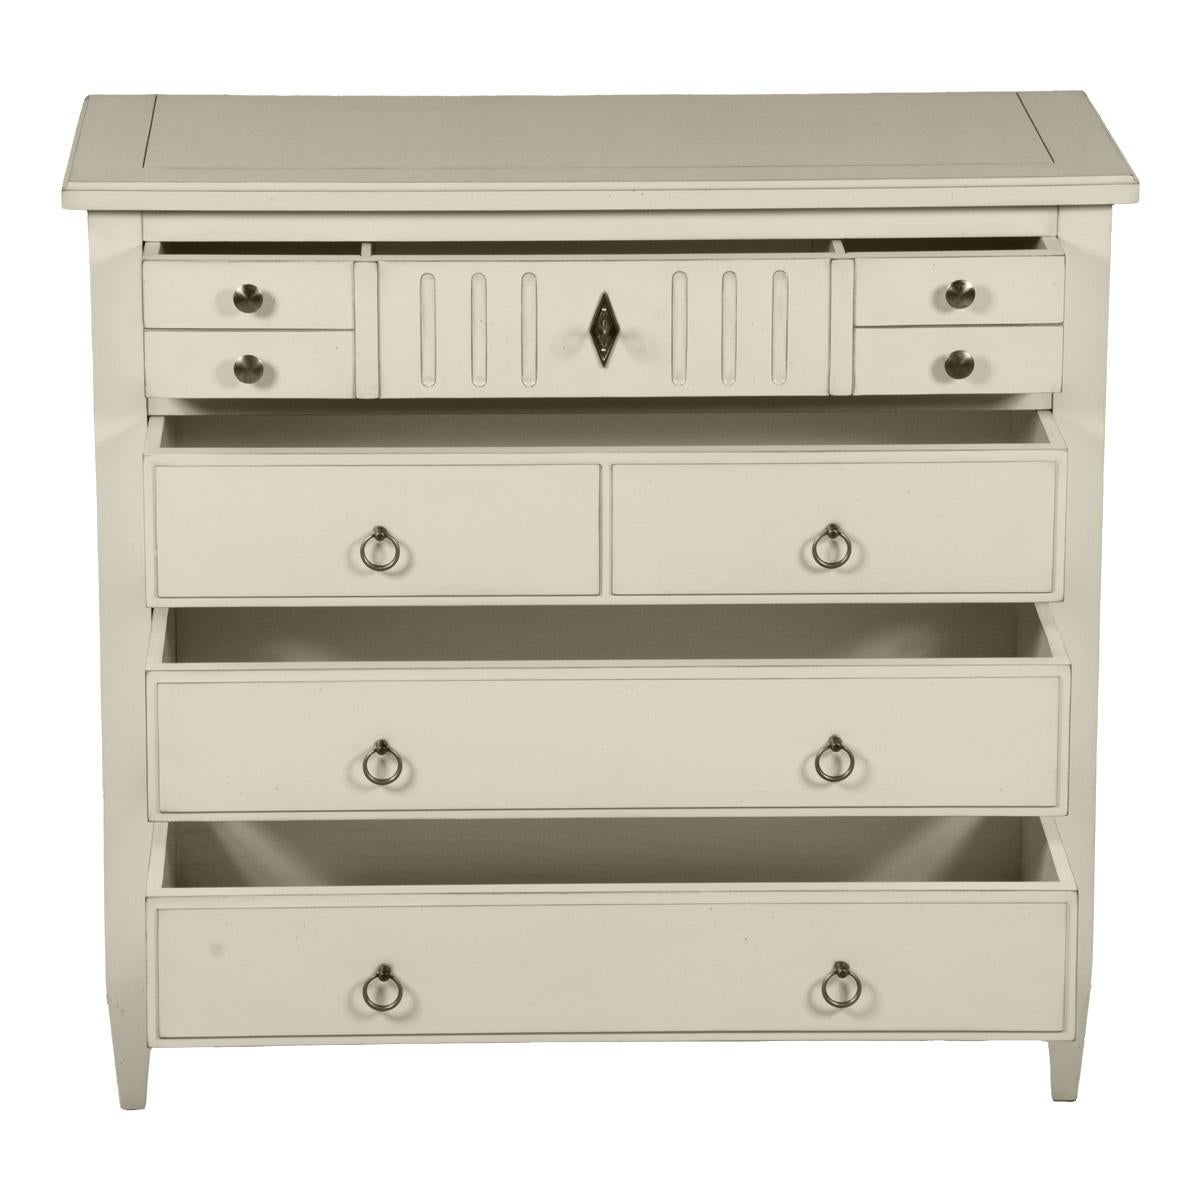 This 4 drawer chest is a handmade reproduction of the French Directoire style at the end of the 18th century. This period is remarkable for its straight, classical and timeless lines. This chest of draws is painted with a French Countryside touch